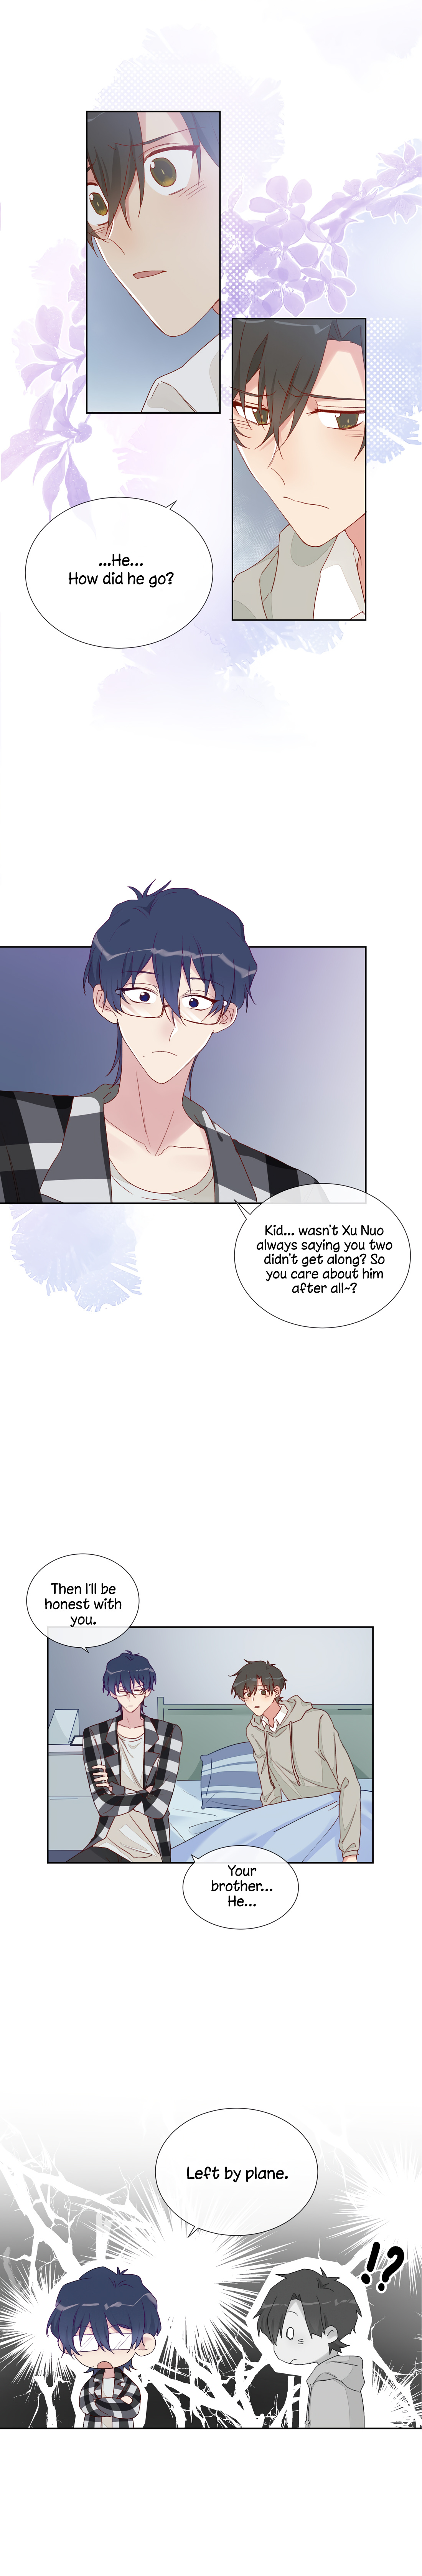 I Want To Hear You Say You Like Me - Page 2